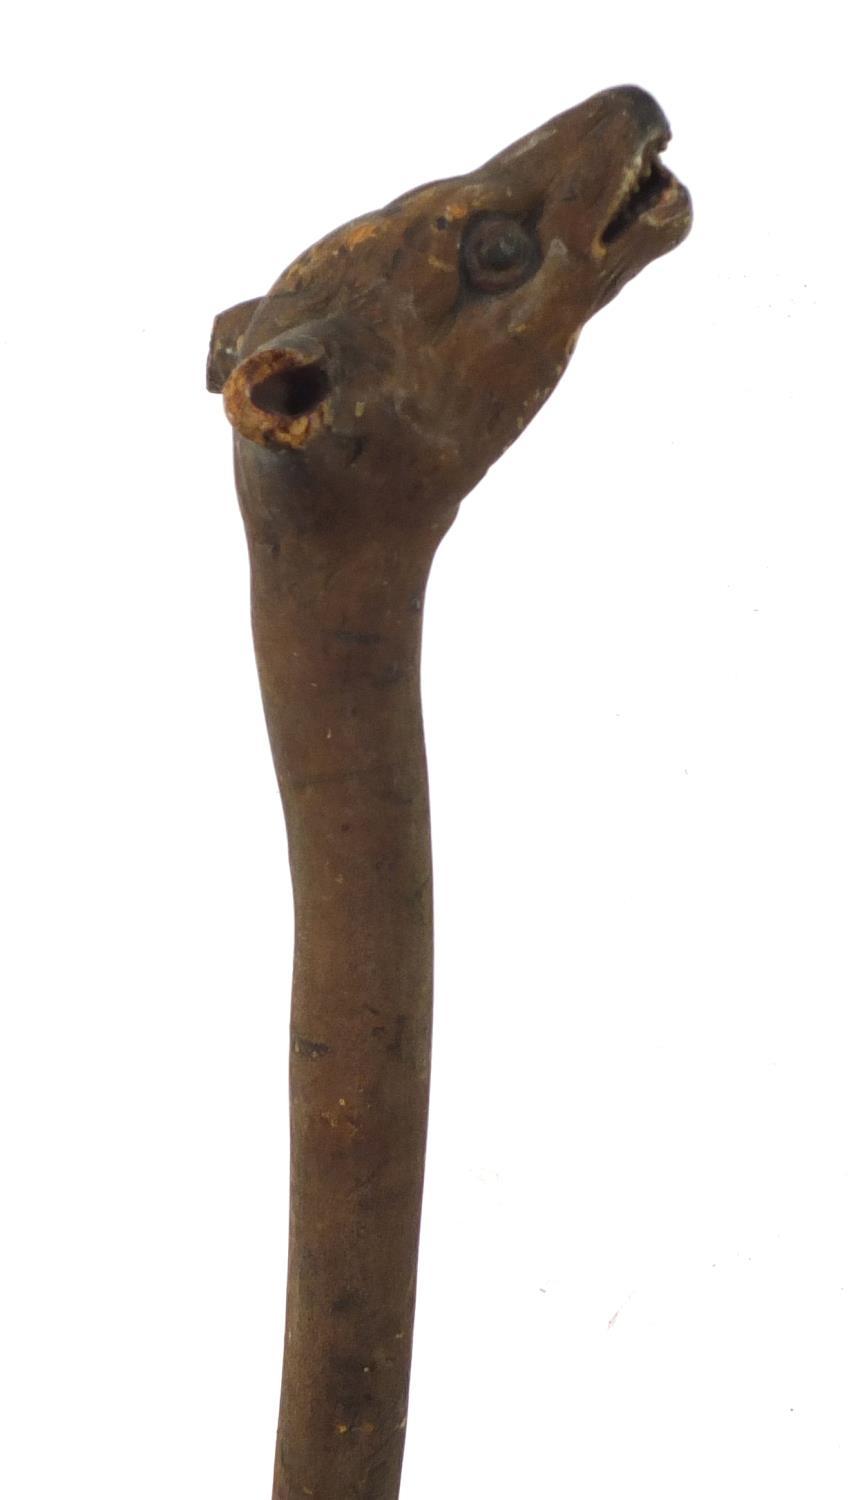 Naturalistic wooden walking stick with carved hyena's head pommel having teeth and painted eyes, - Image 5 of 6